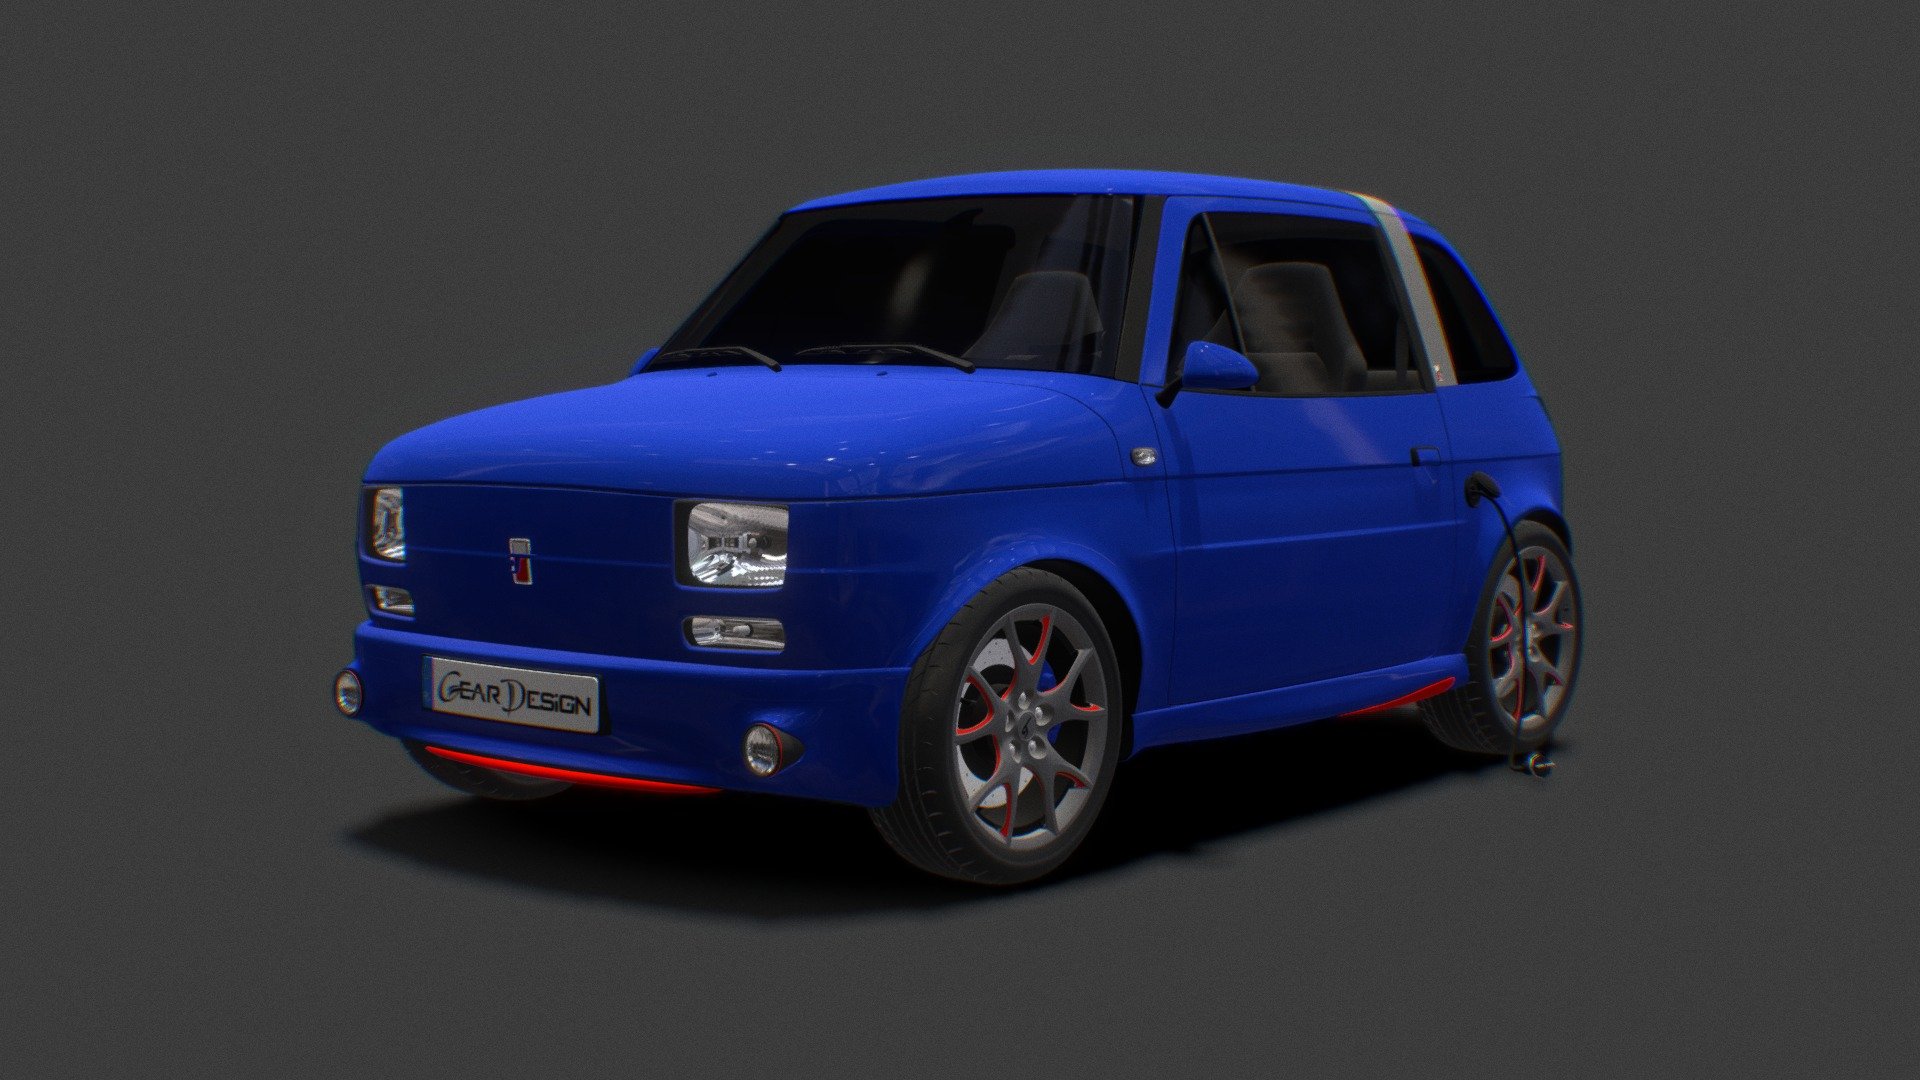 Prototype model created from passion to polish automotive industry and 3D graphic 3d model